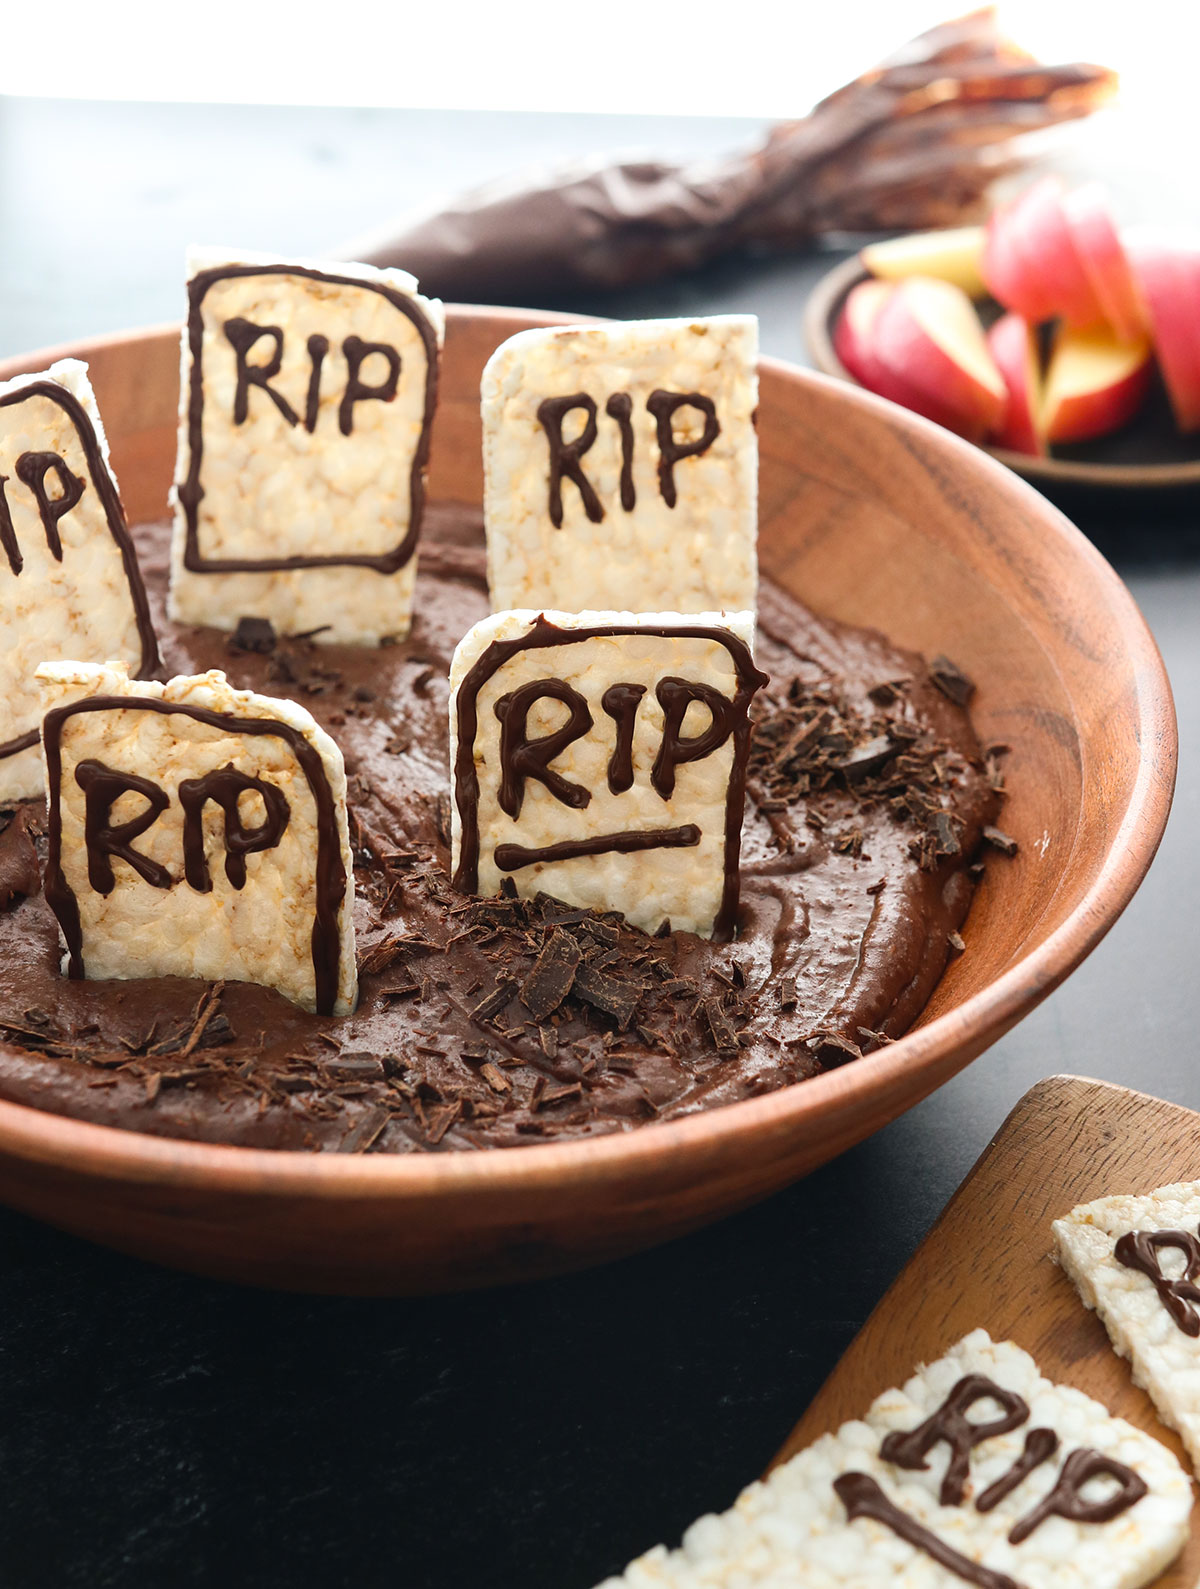 A bowl of chocolate hummus with pretend tombstones made of rice crackers.